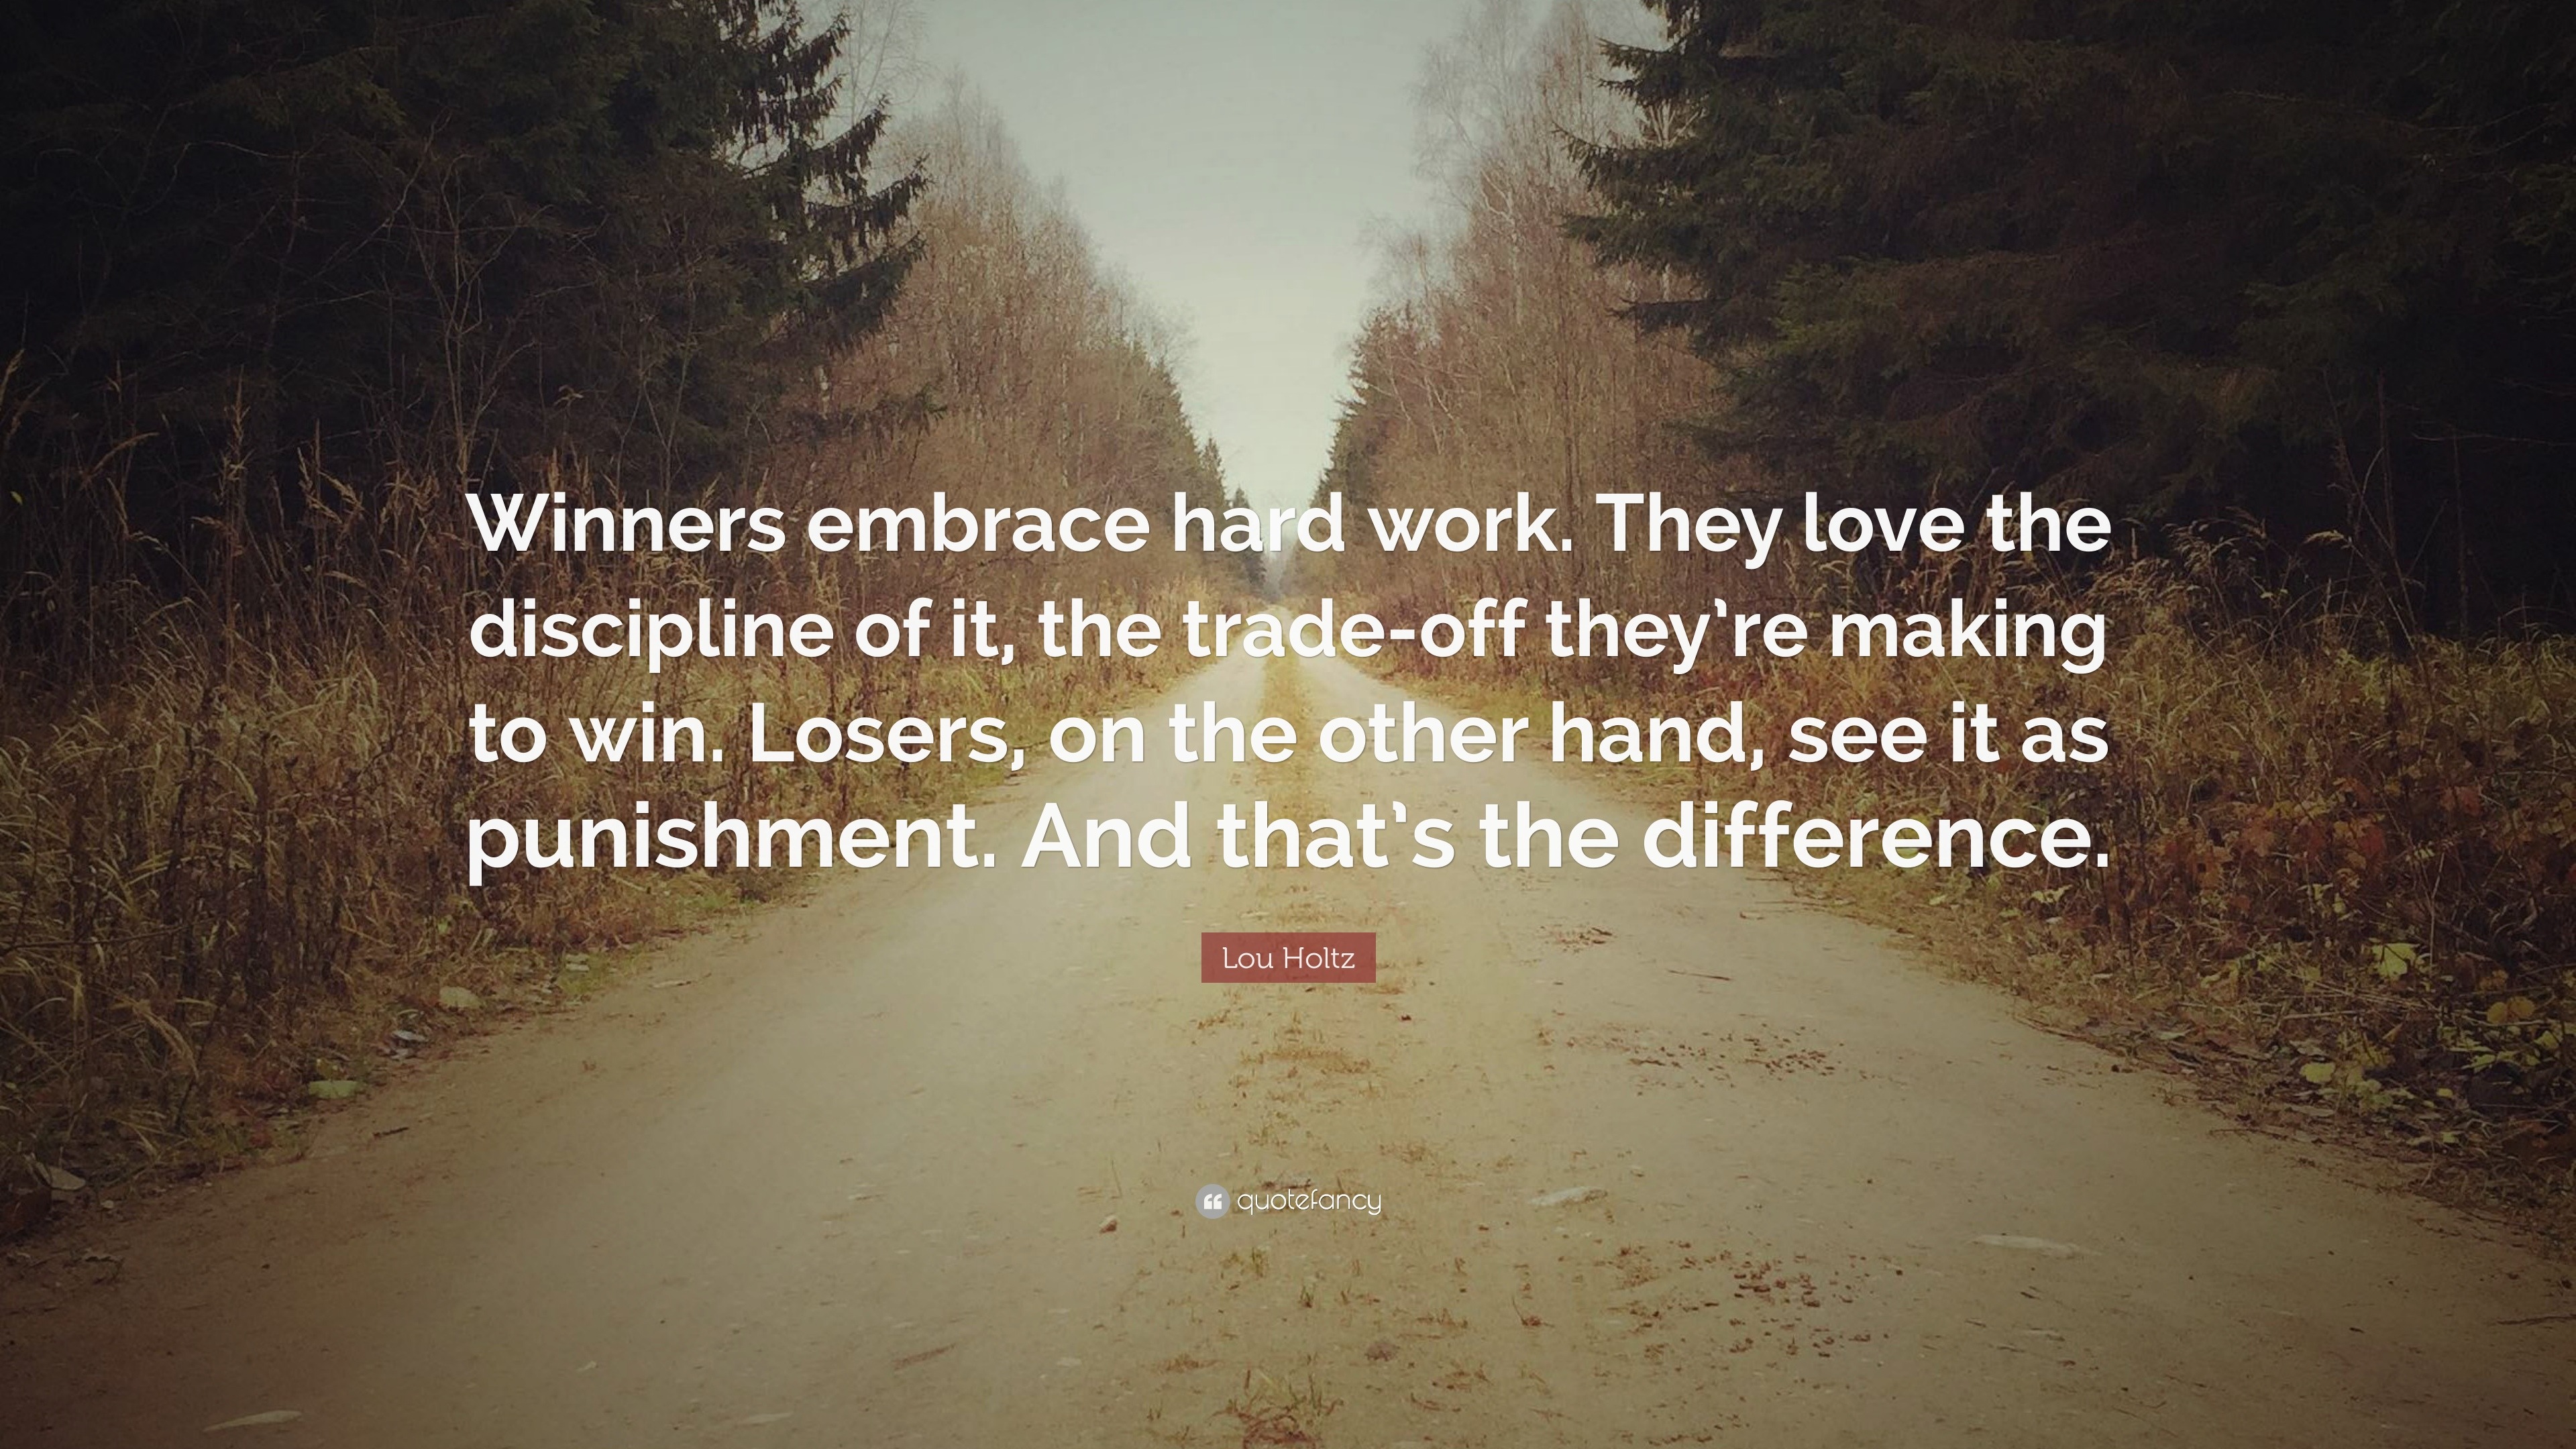 Lou Holtz Quote: “Winners embrace hard work. They love the discipline